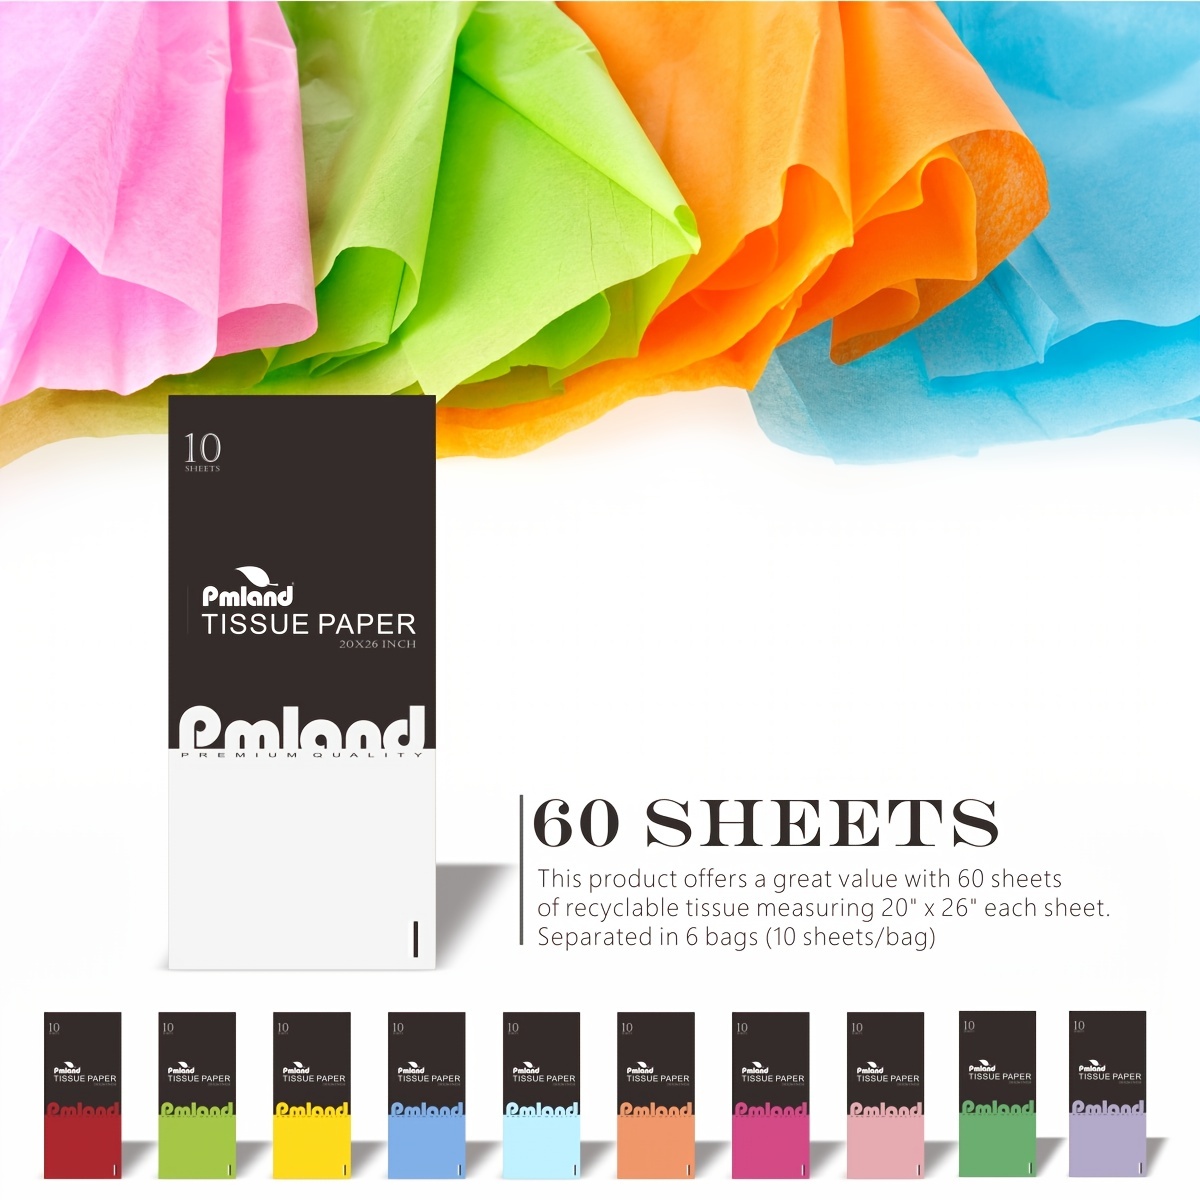 Pastel Tissue Paper Pack - 5 Colours Wrapping Craft Acid Free - Full Sheets